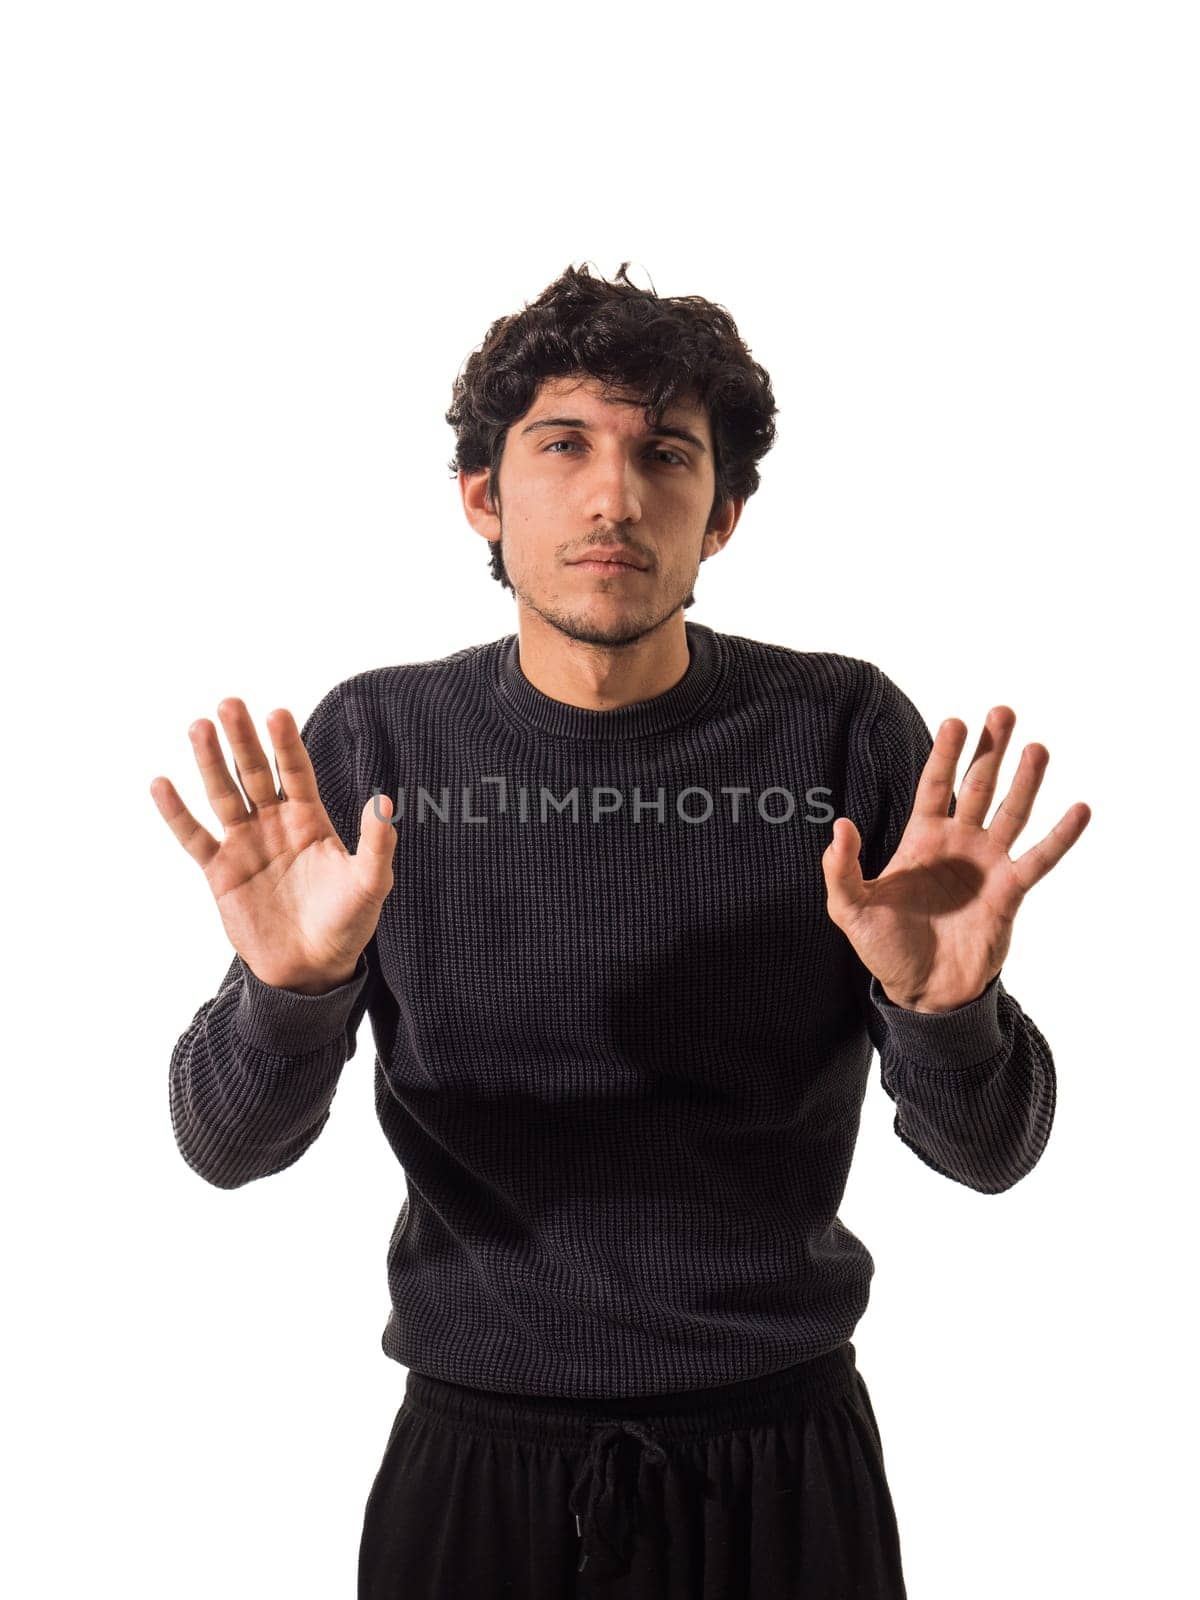 A man in a black sweater is holding his hands up, isolated on white background in studio shot